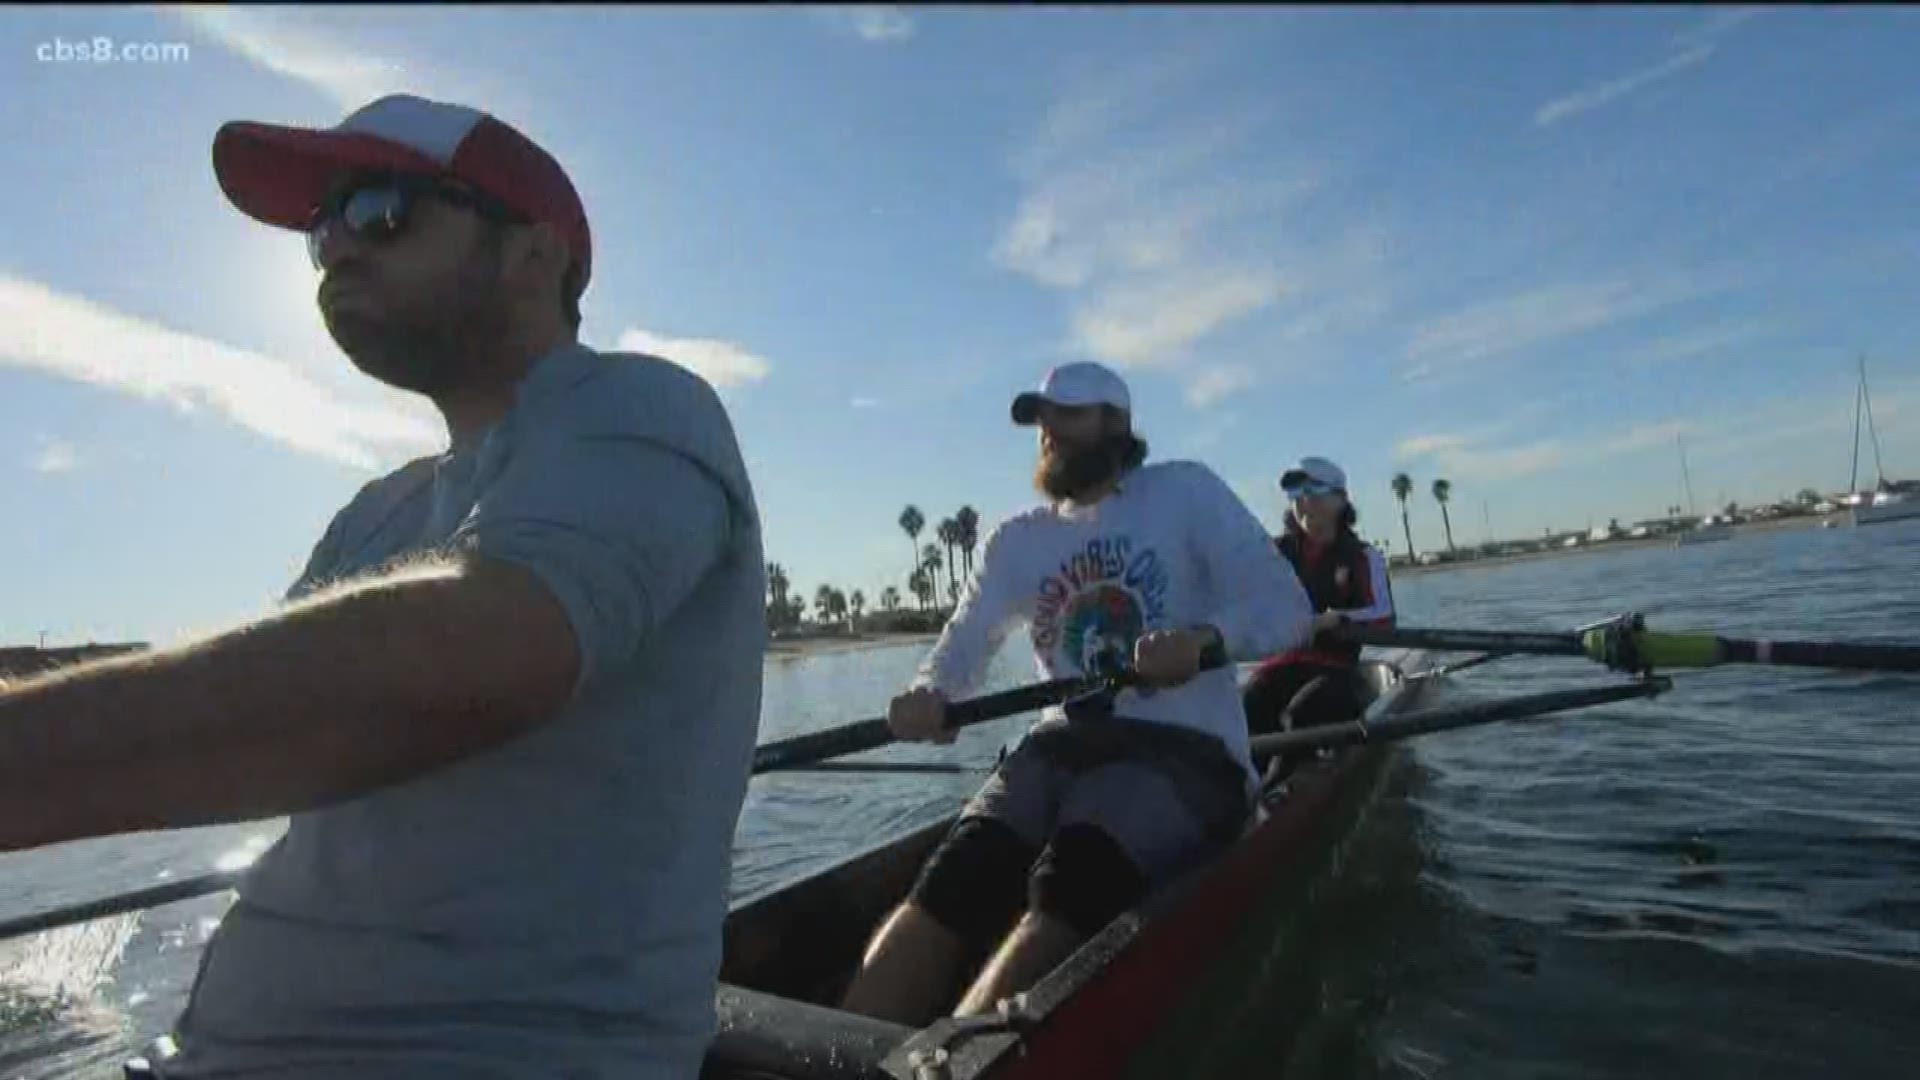 With over 131 years of experience, the San Diego rowing club offers options for everyone to enjoy.